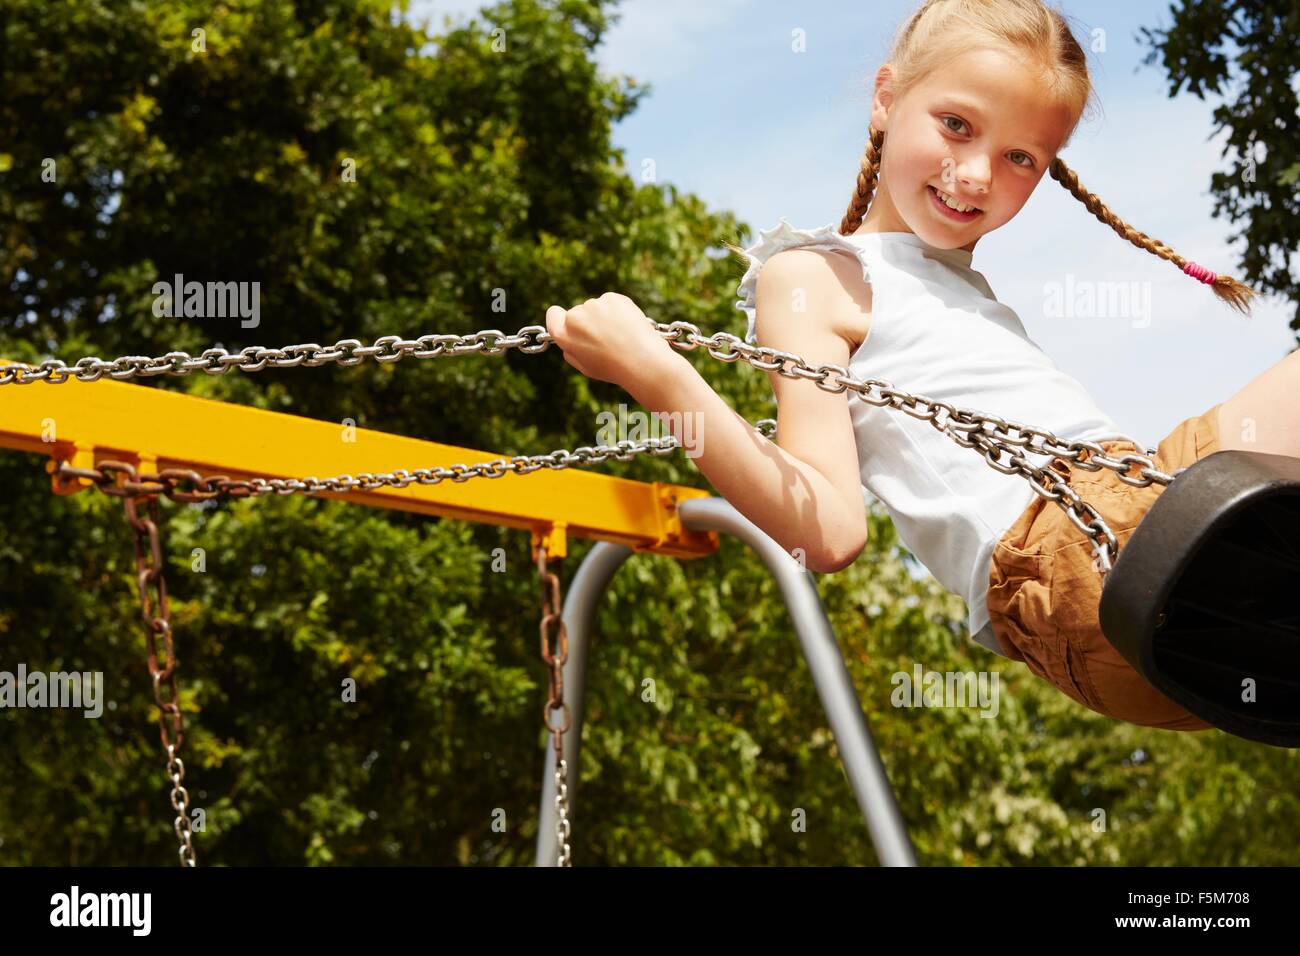 Girl with pigtails on swing looking at camera smiling Stock Photo